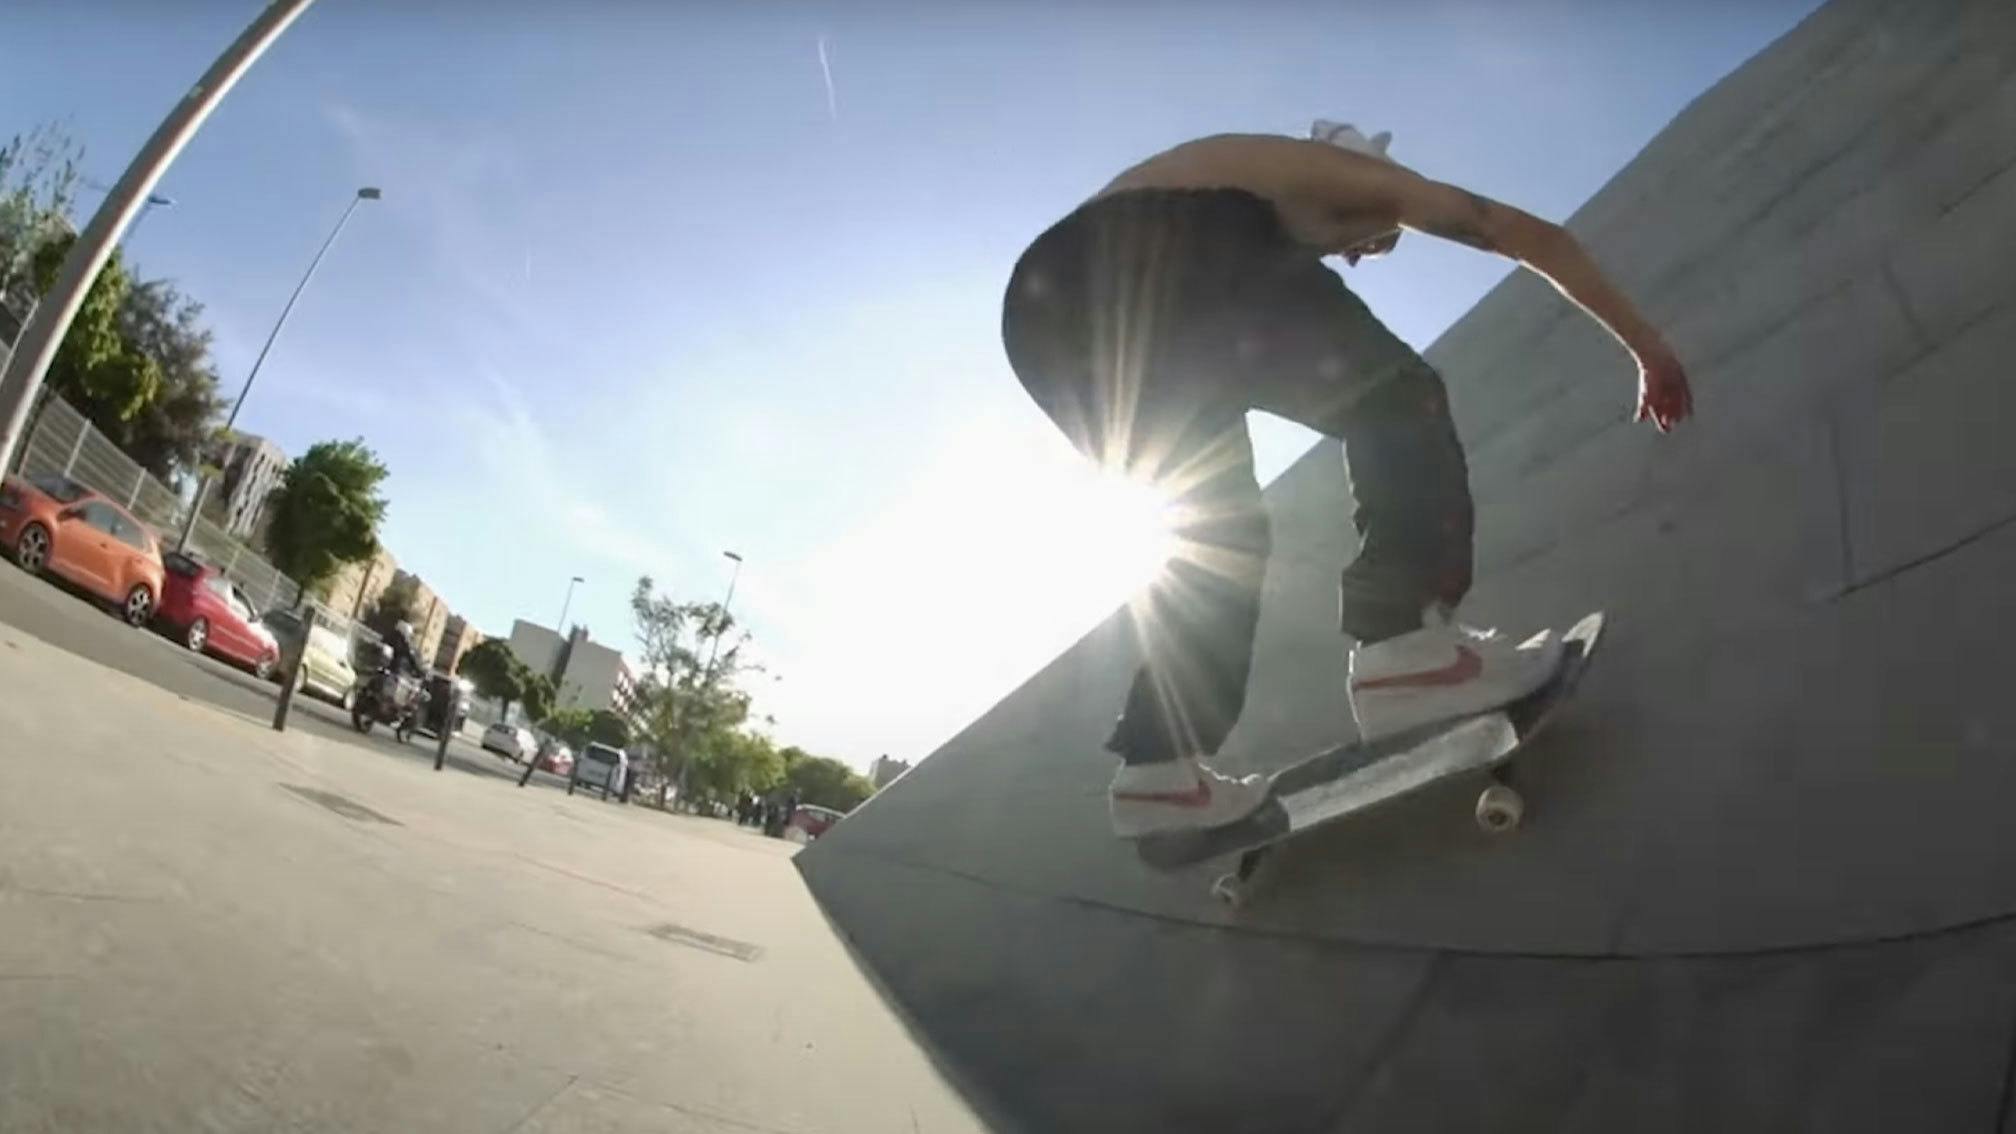 Hot Water Music team up with Santa Cruz Skateboards for Collect Your Things And Run video